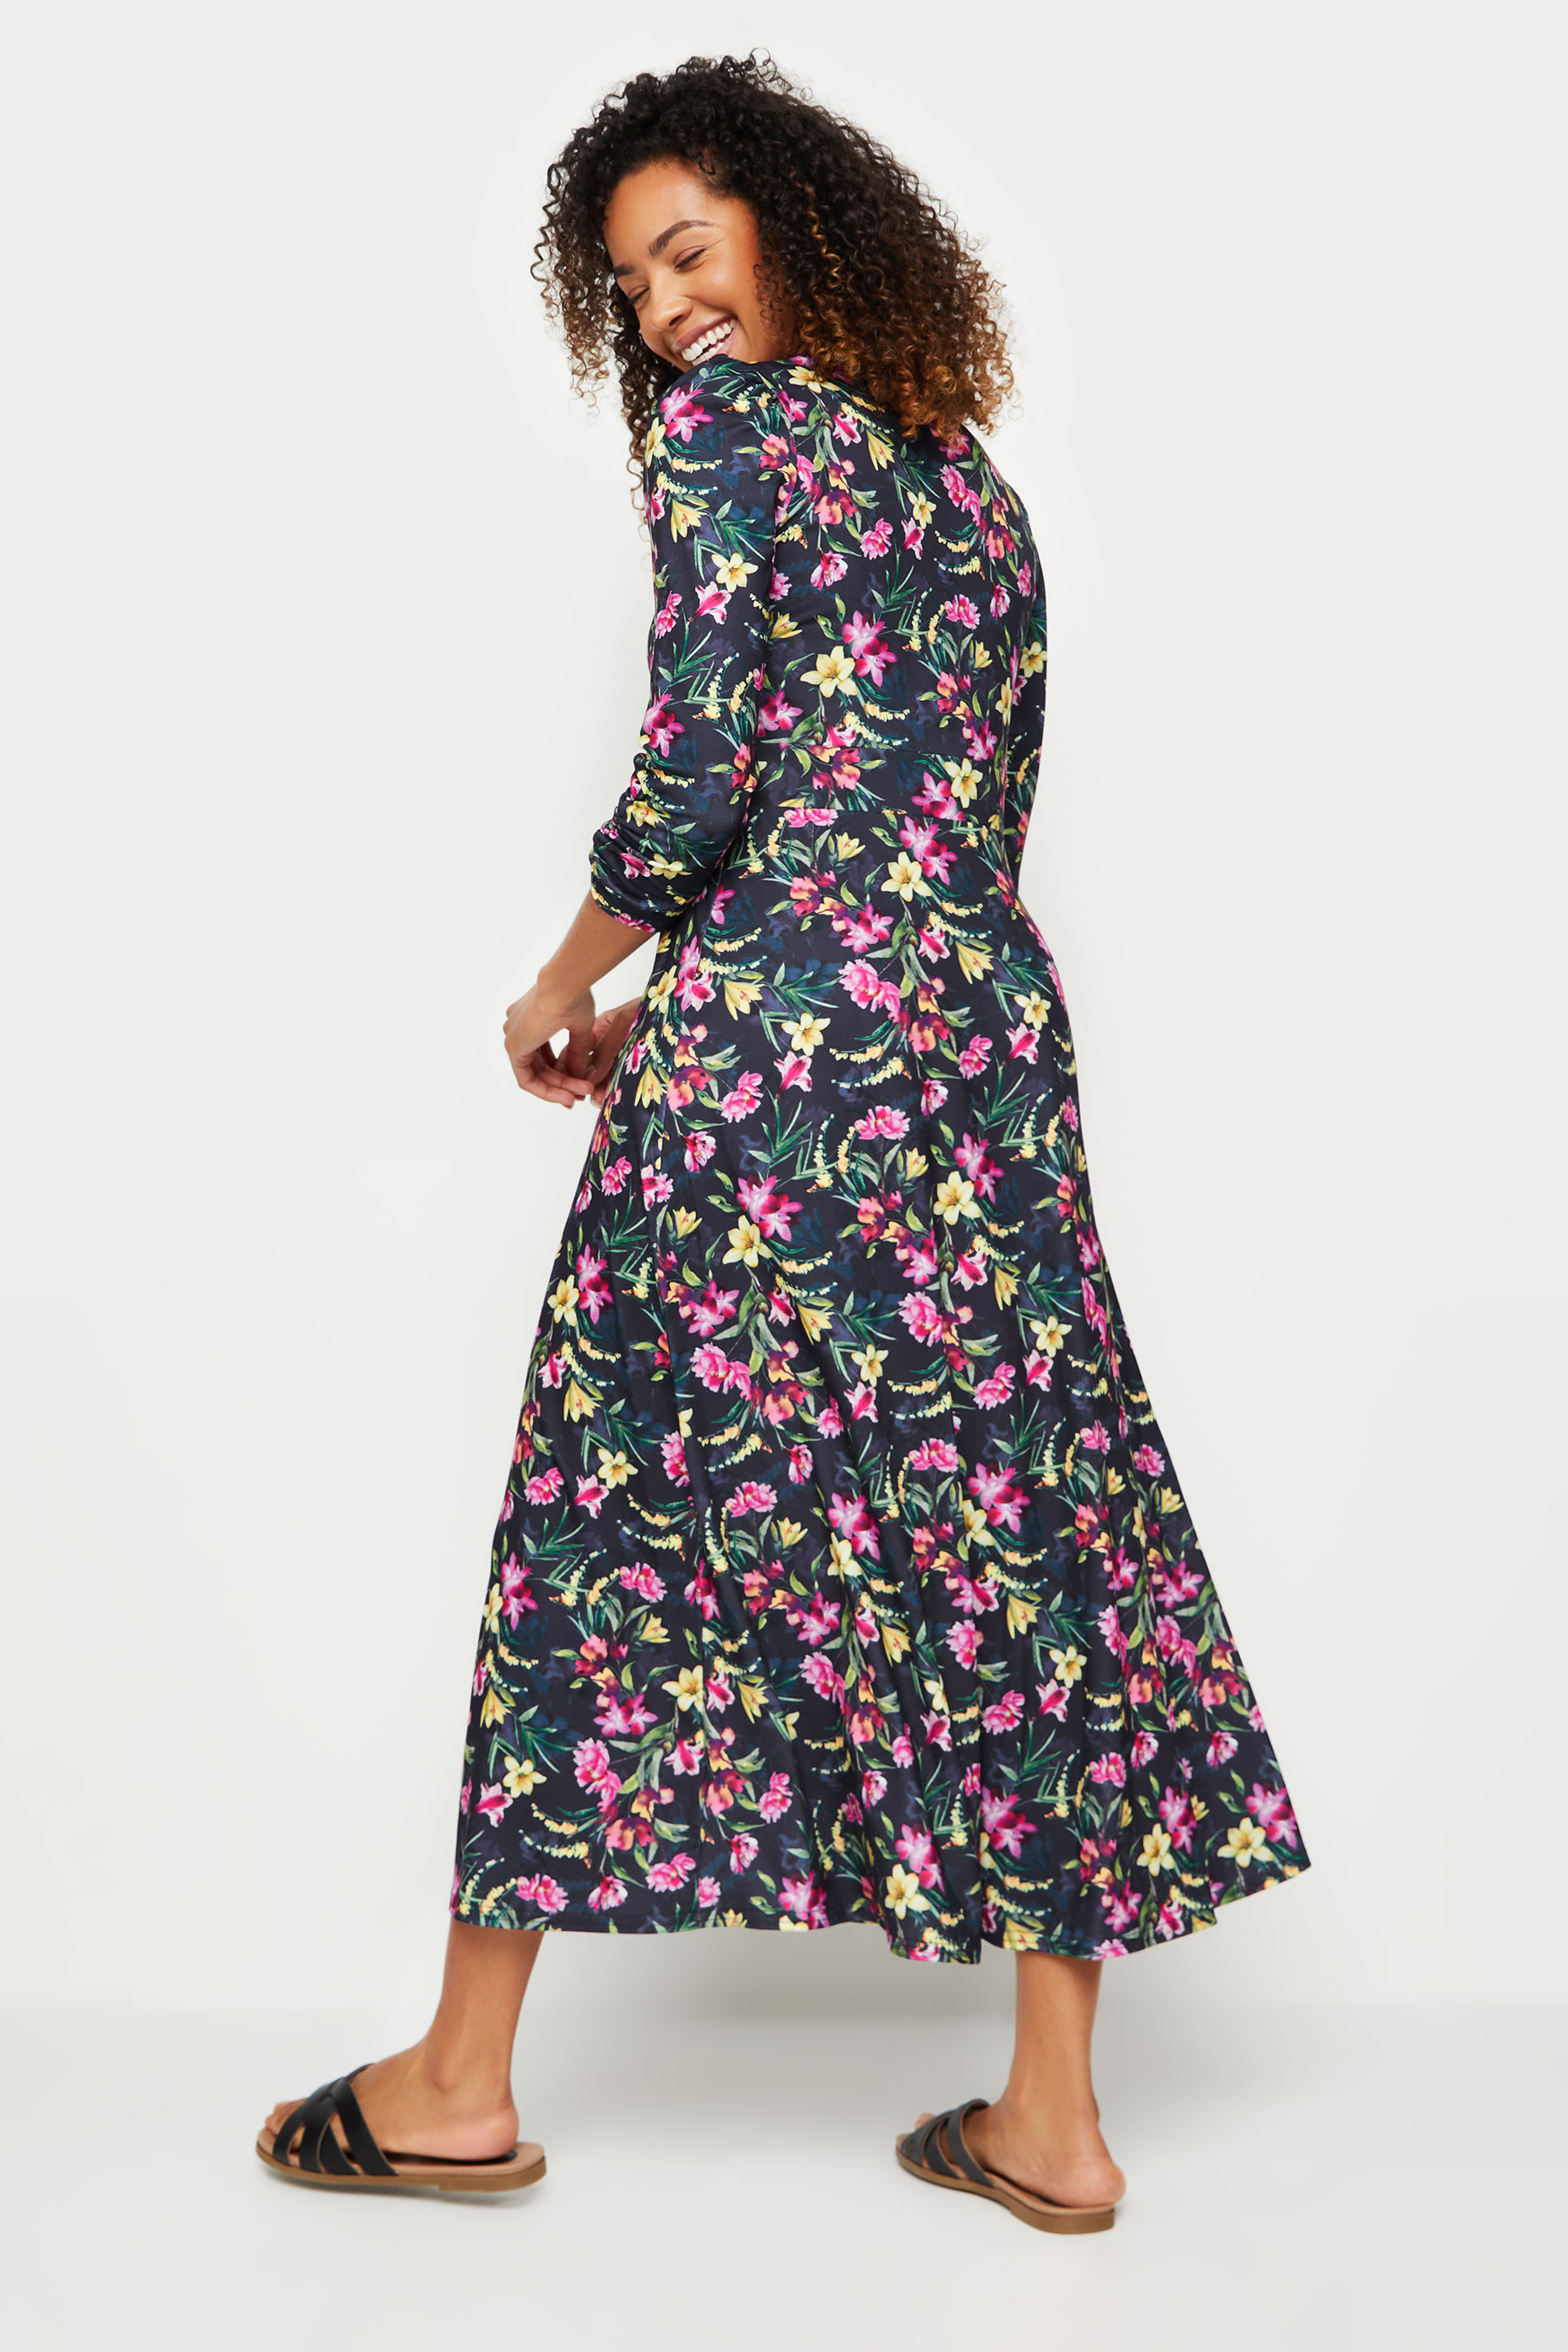 M&Co Navy Blue Floral Print Belted Wrap Midi Dress | M&Co 3